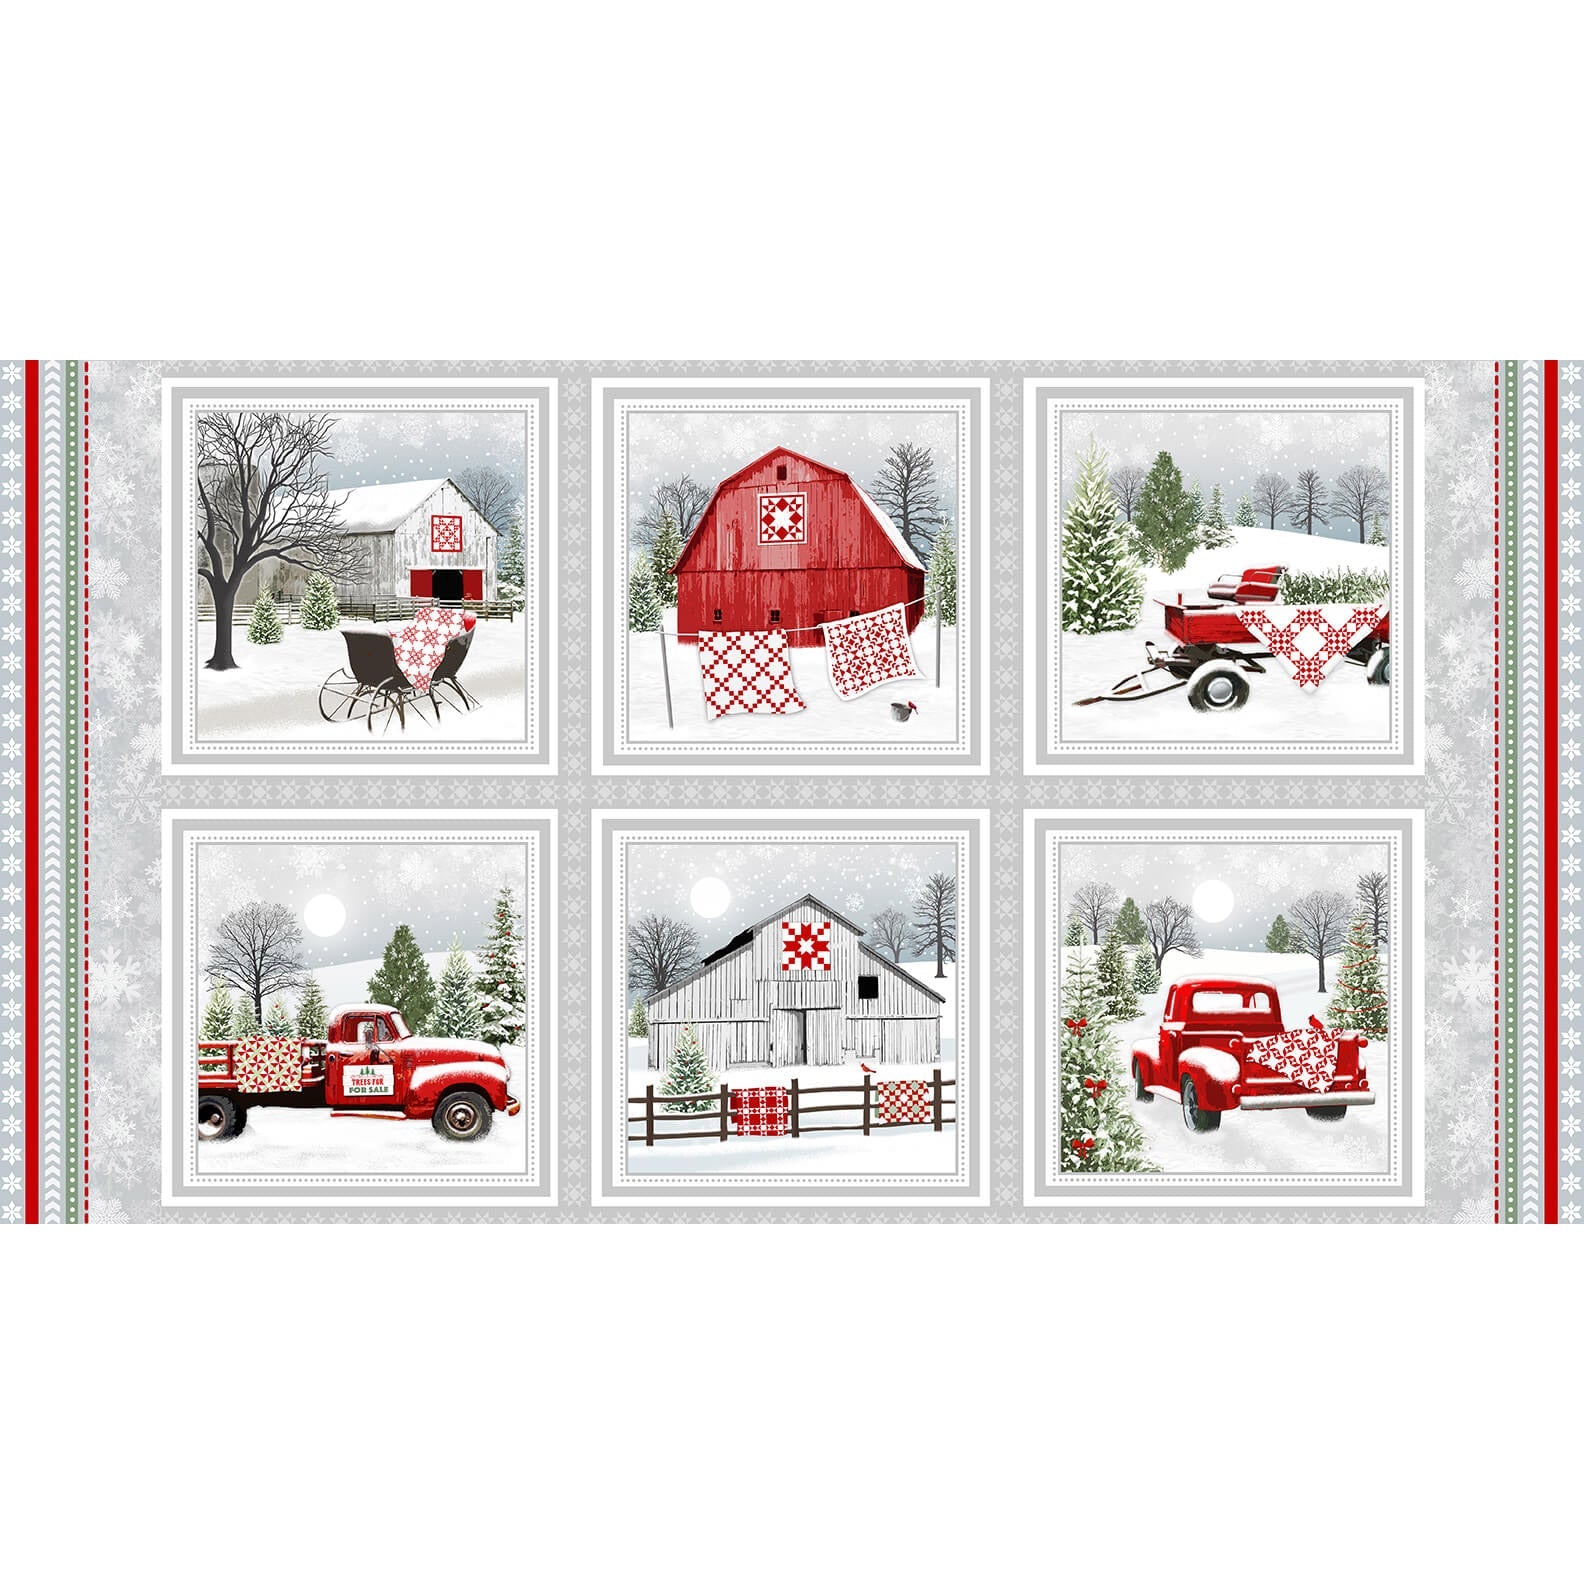 The block panel (9208-98) from the Holiday Heartland collection by Henry Glass Fabric features 6 blocks with pictures of a sleigh, a wagon, 2 barns, and 2 red trucks with red and white quilts decorating each. Use these blocks as the foundation of a quilt, wall hanging, or tote or mount them inside a window frame for a unique Christmas decor.